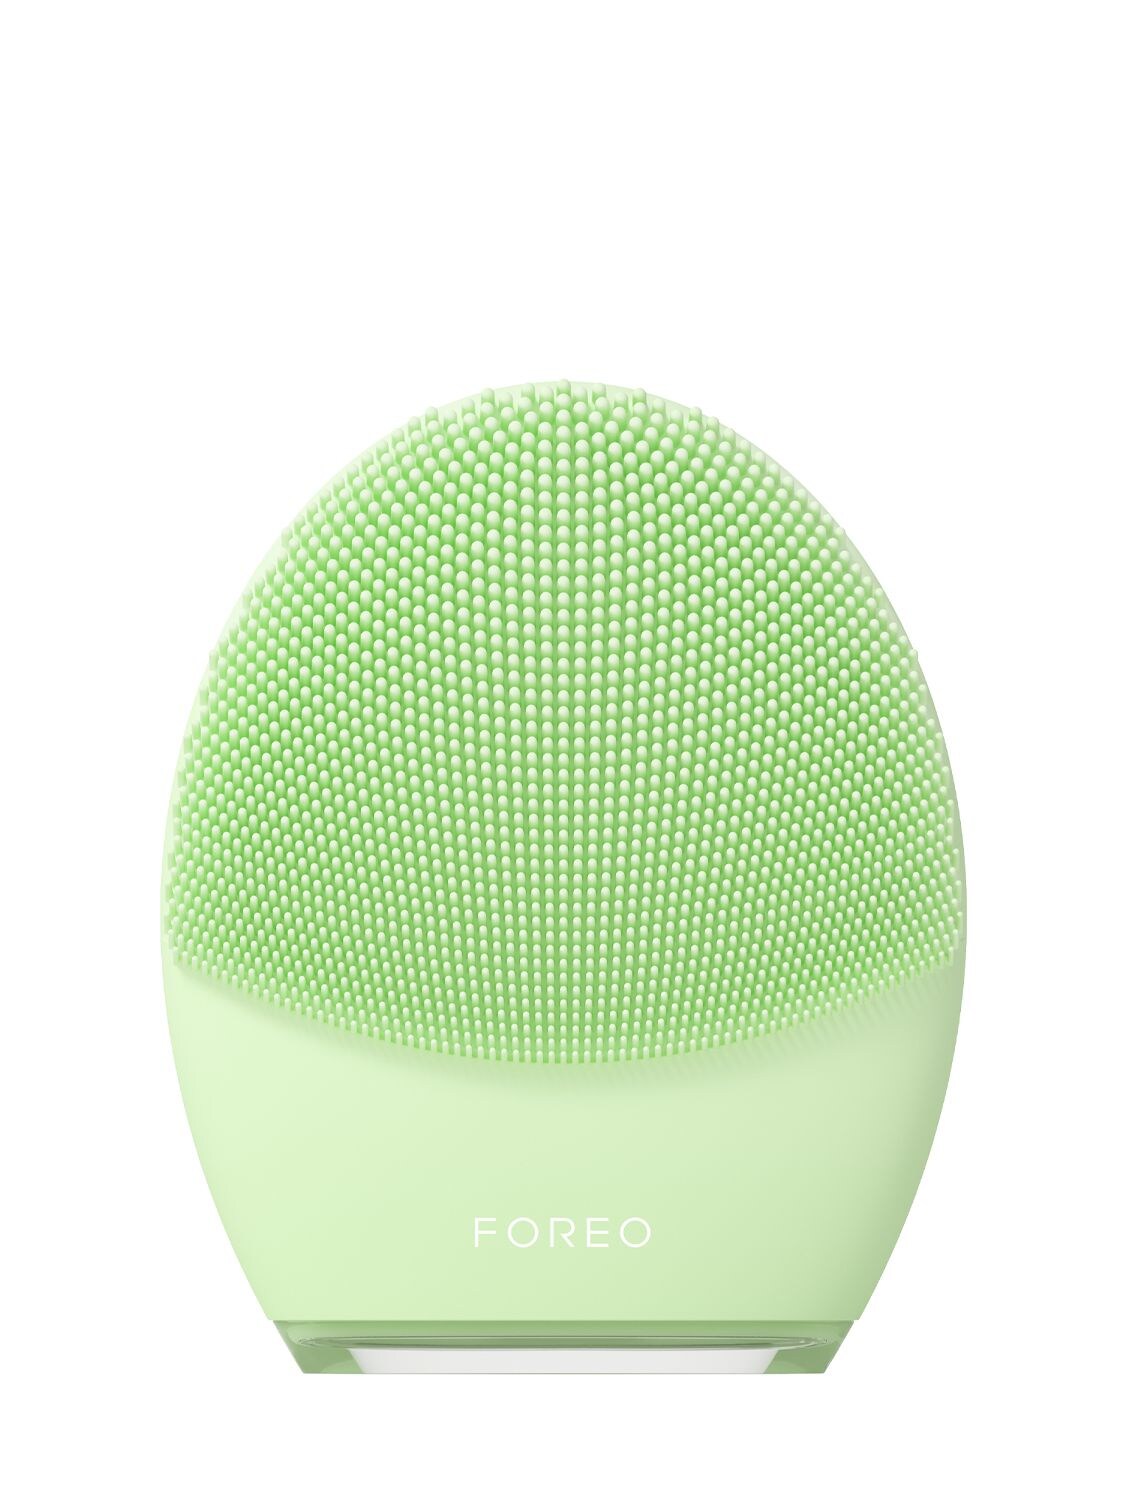 Luna 4 Face Cleansing Device – BEAUTY – WOMEN > BEAUTY DEVICES & TOOLS > BEAUTY DEVICES